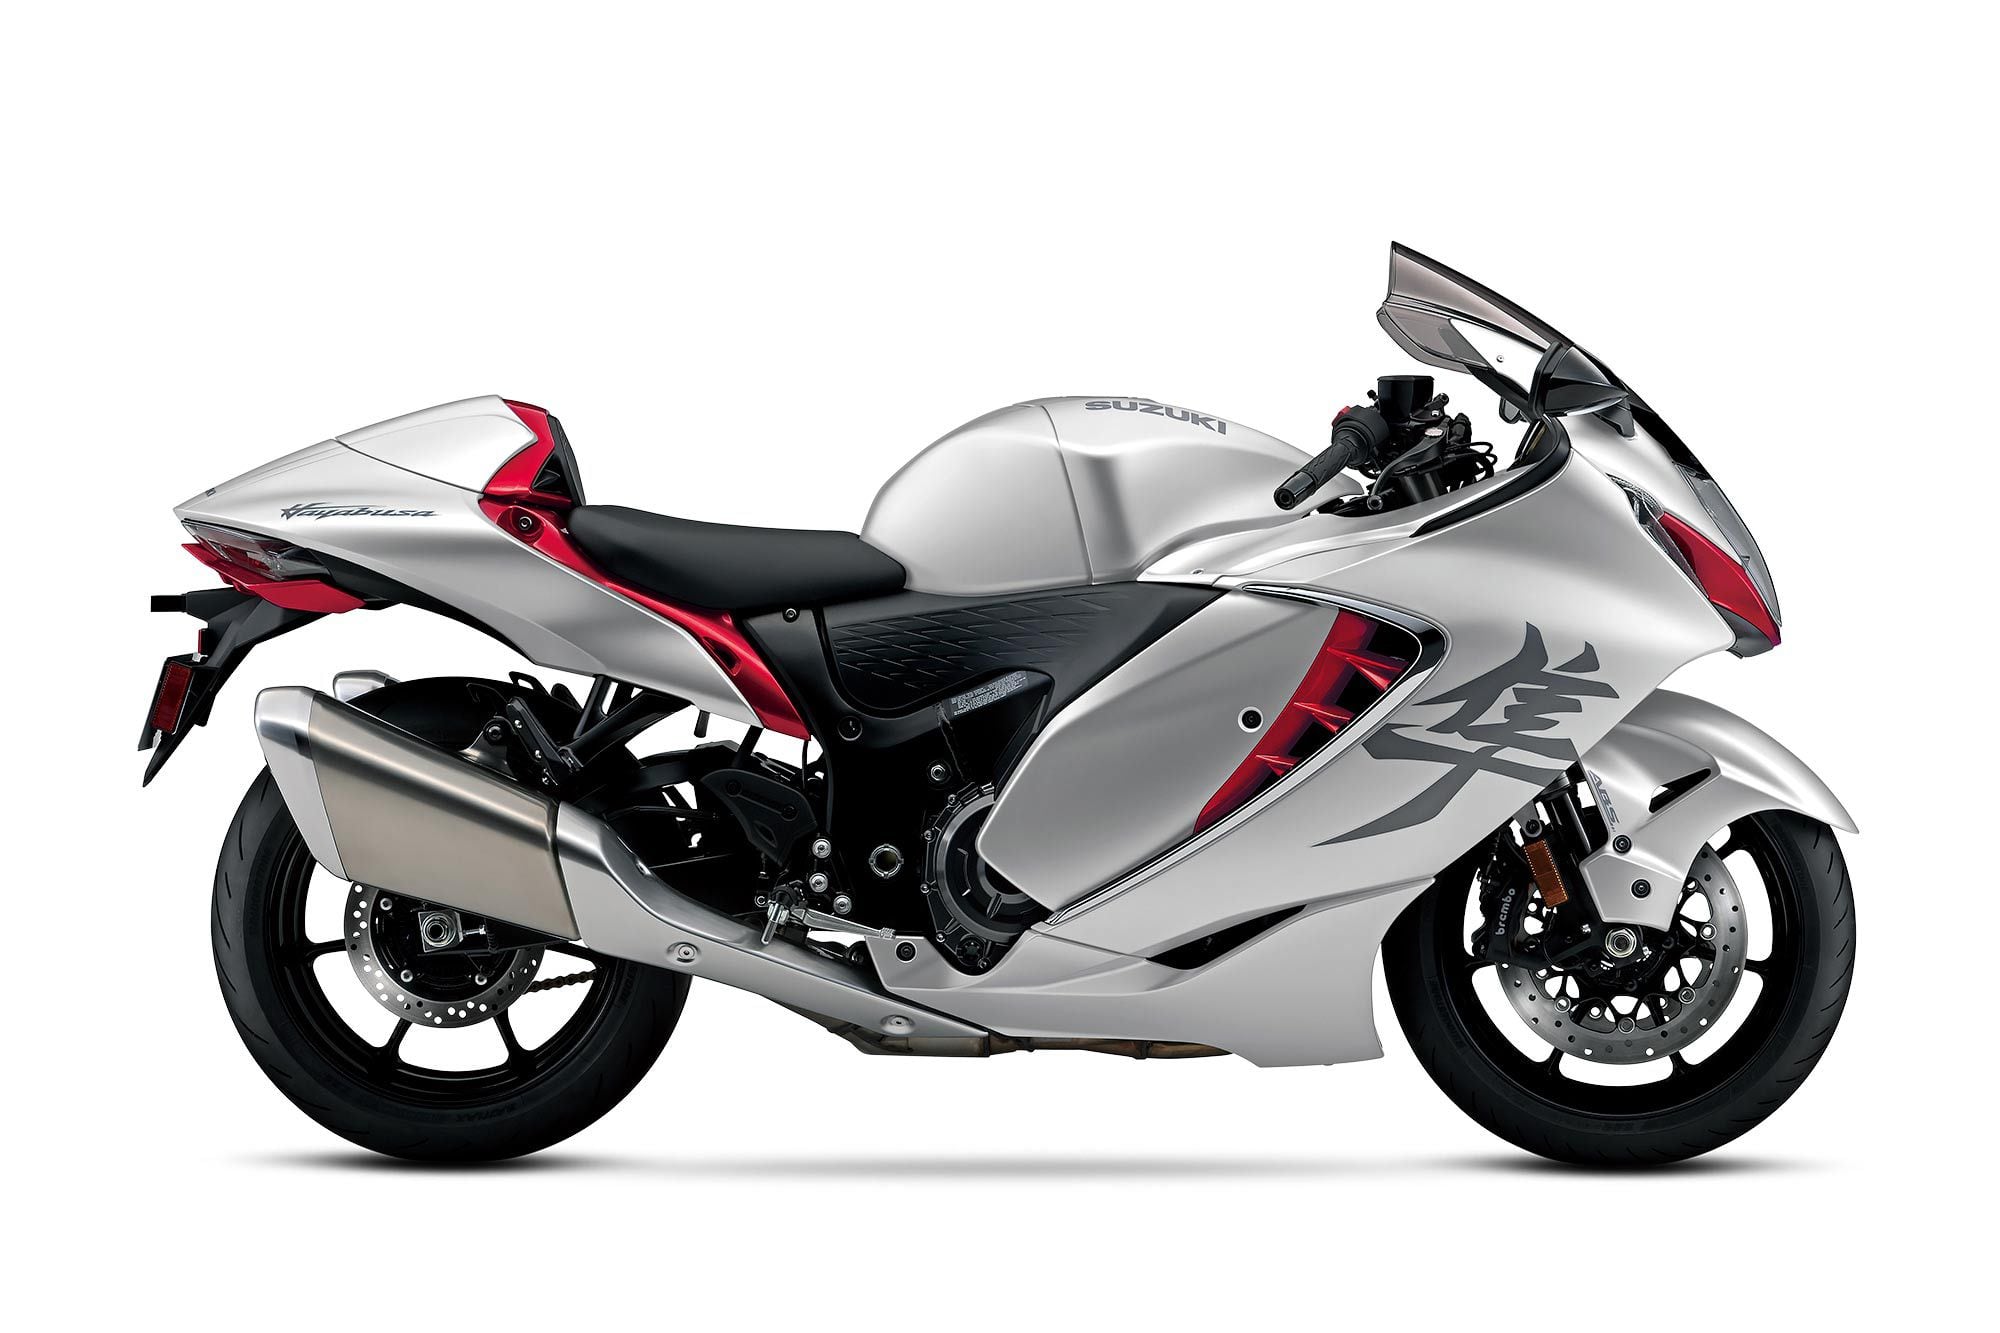 The current Hayabusa was cleaned up for the 2021 model year after being pulled off the market in Europe in 2018.